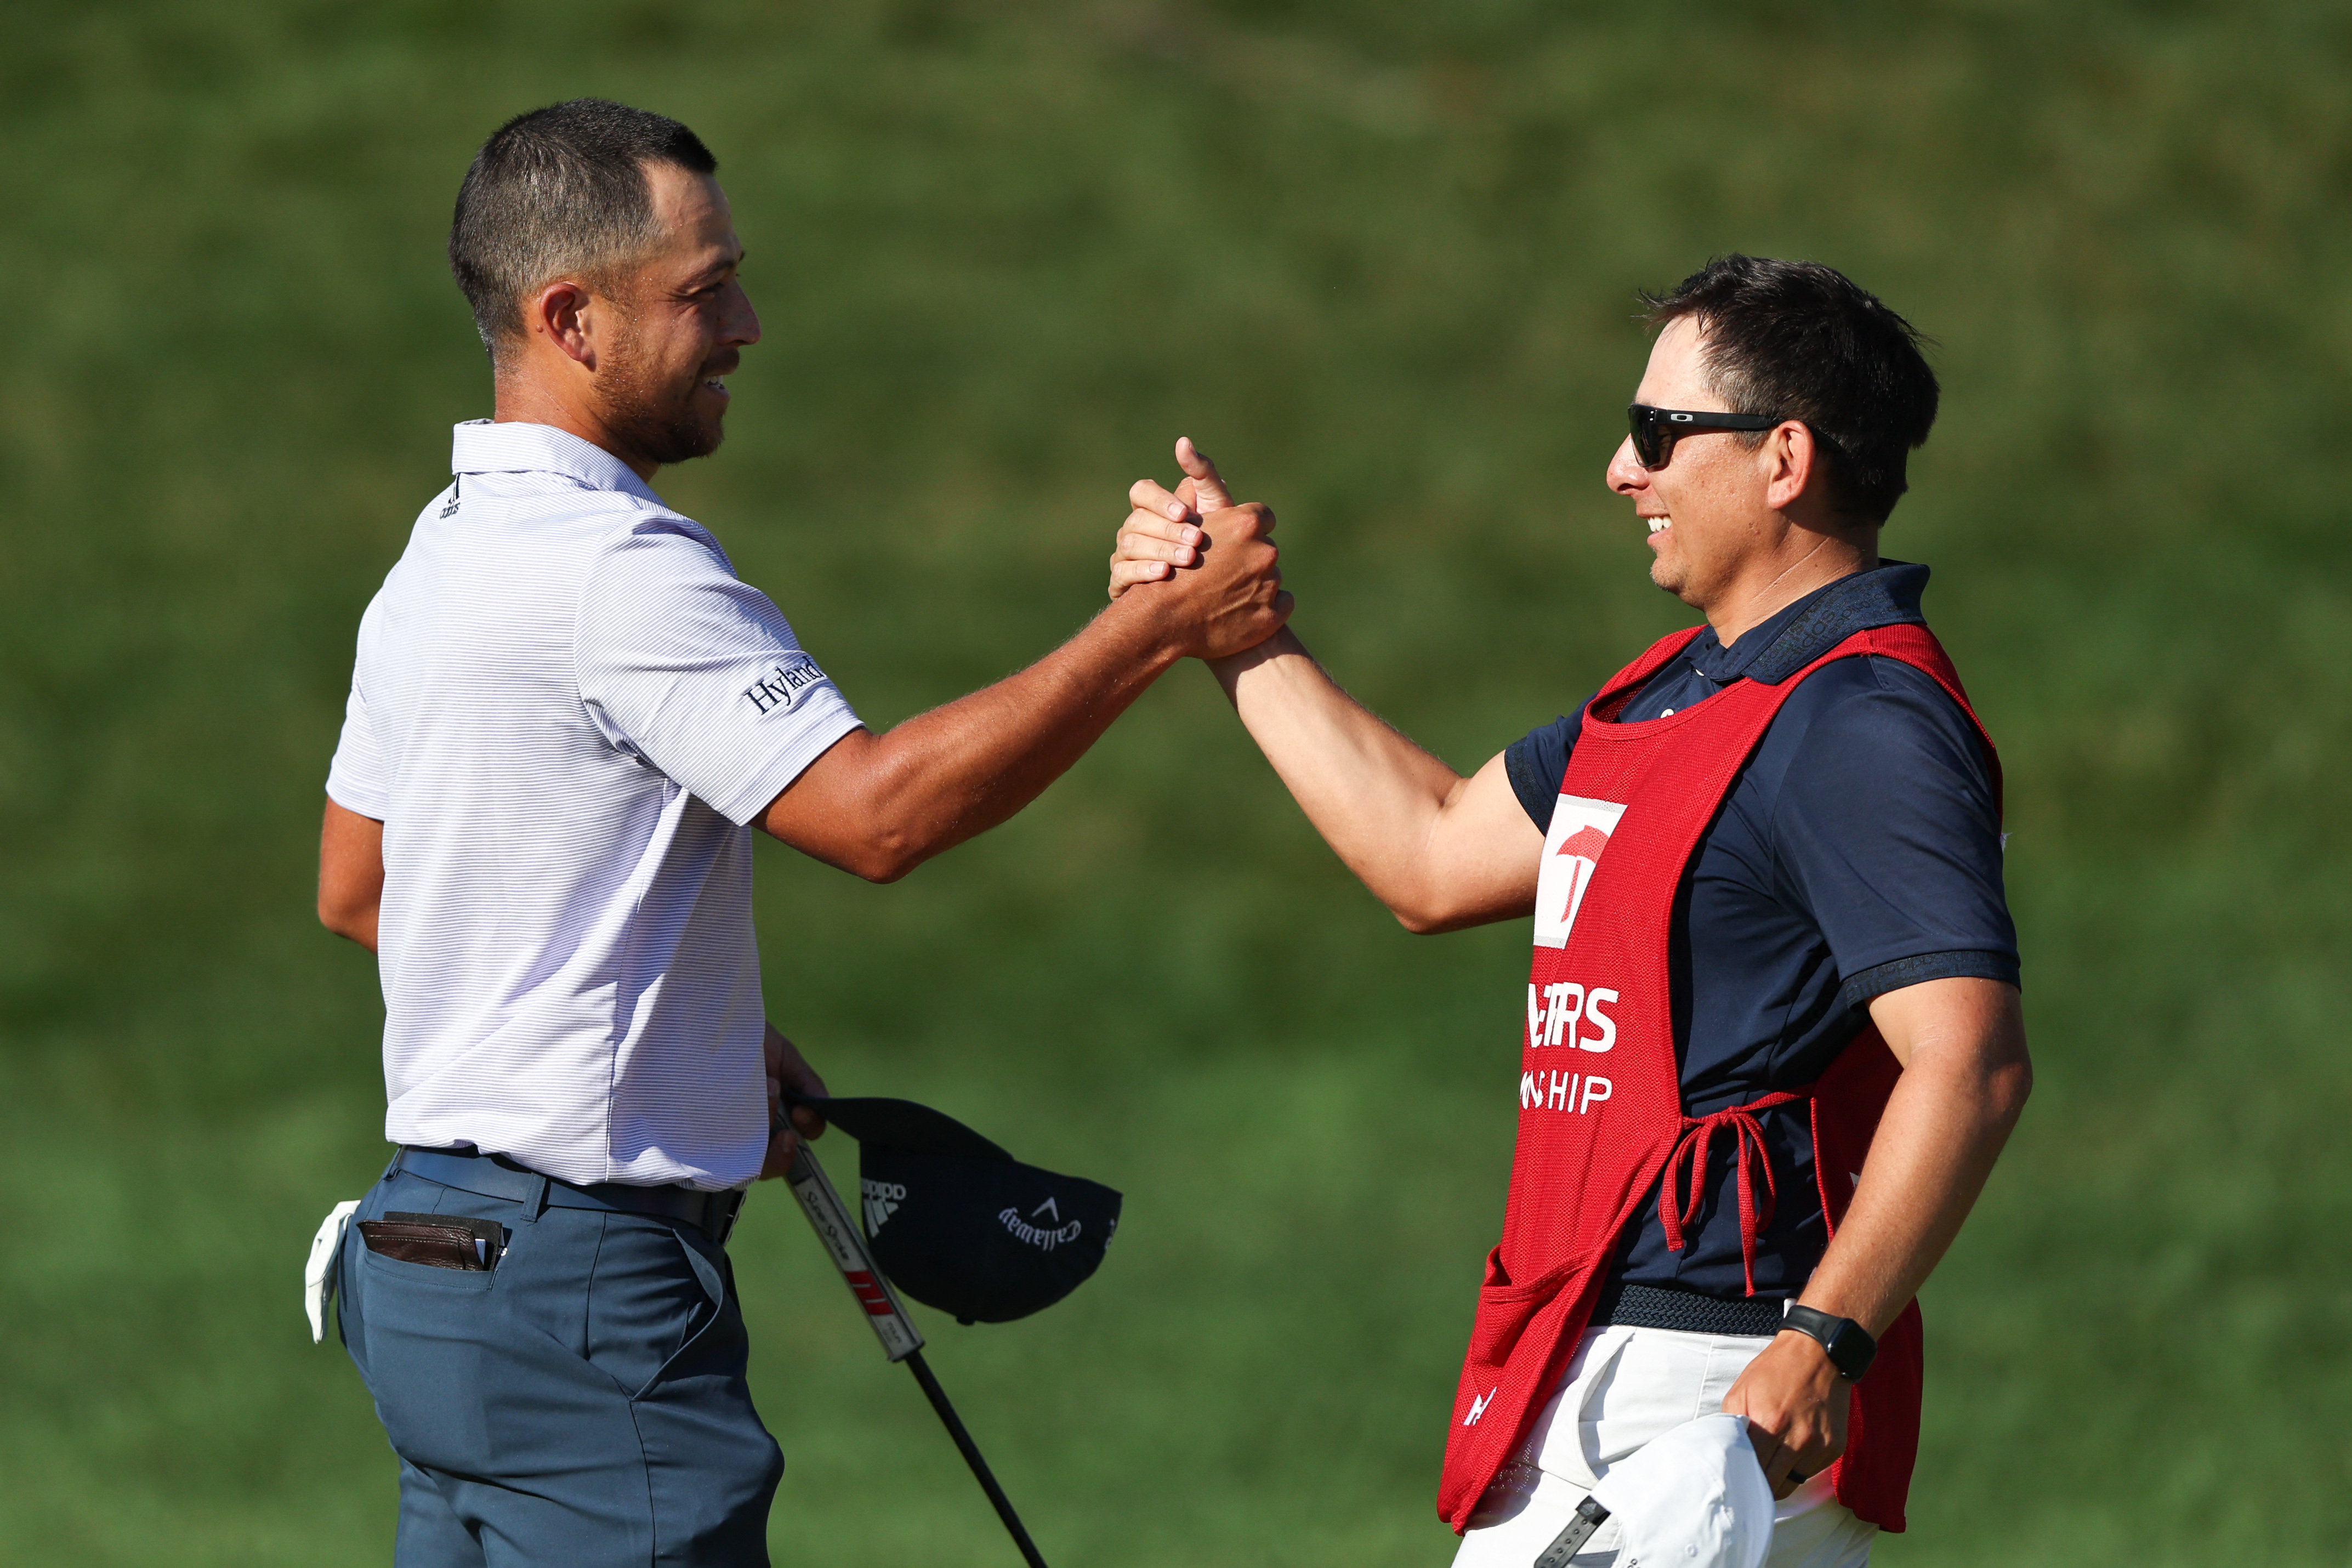 Jun 26, 2022; Cromwell, Connecticut, USA; Xander Schauffele shakes hands with his caddie, Austin Kaiser, after winning the Travelers Championship golf tournament. Mandatory Credit: Vincent Carchietta-USA TODAY Sports